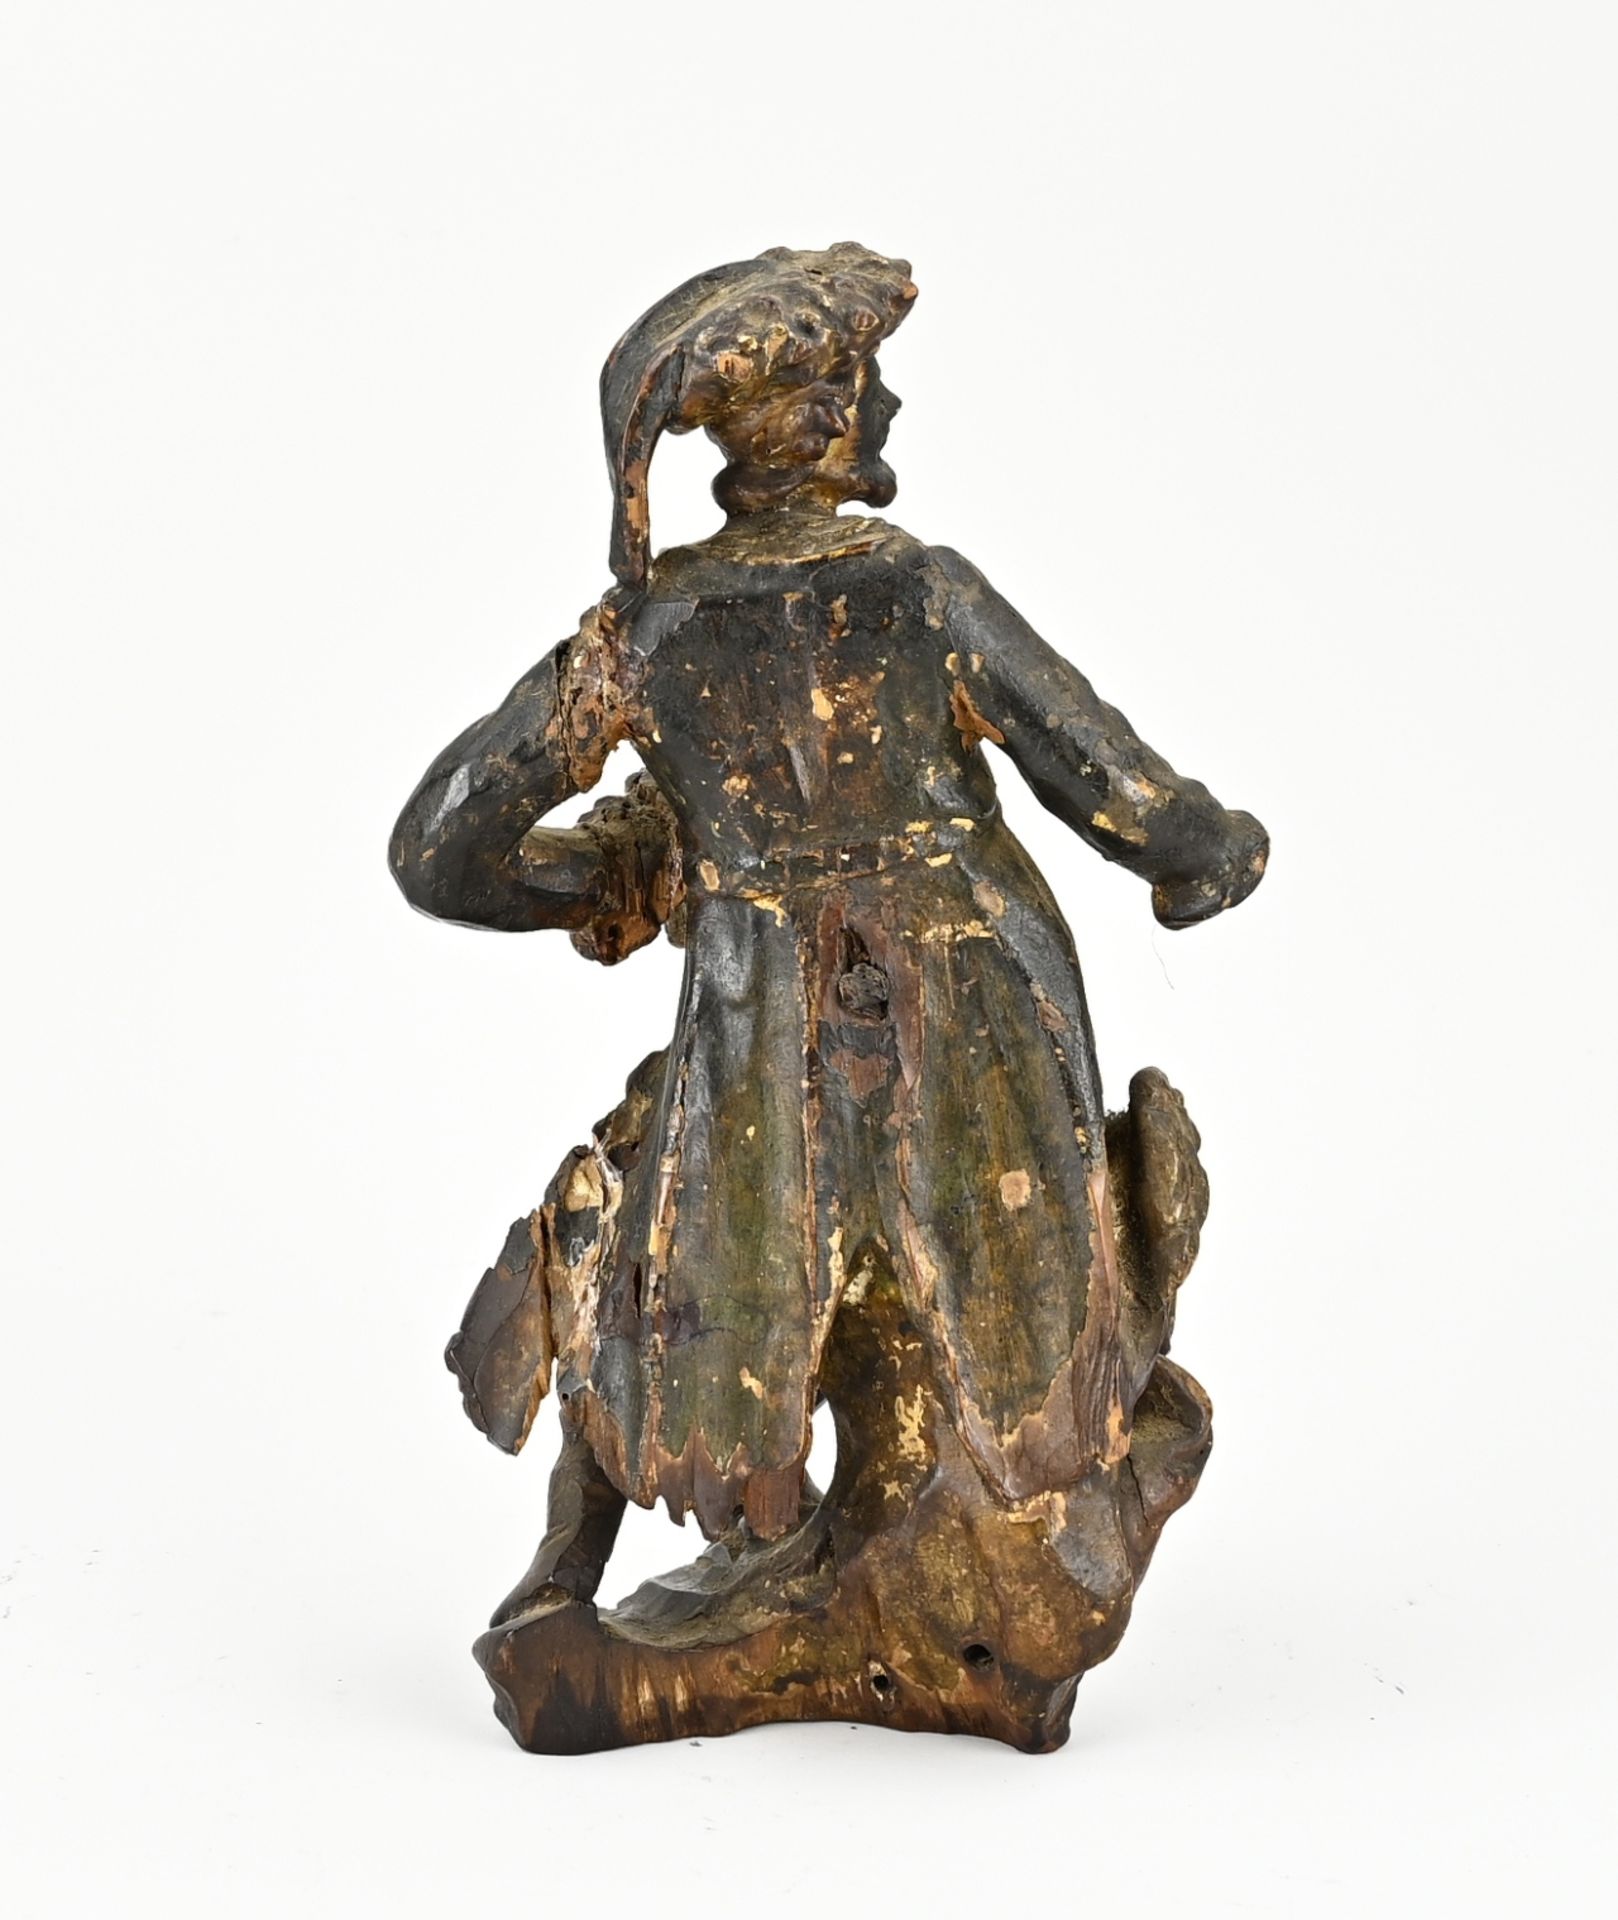 Woodcarved figure, H 23 cm. - Image 2 of 2